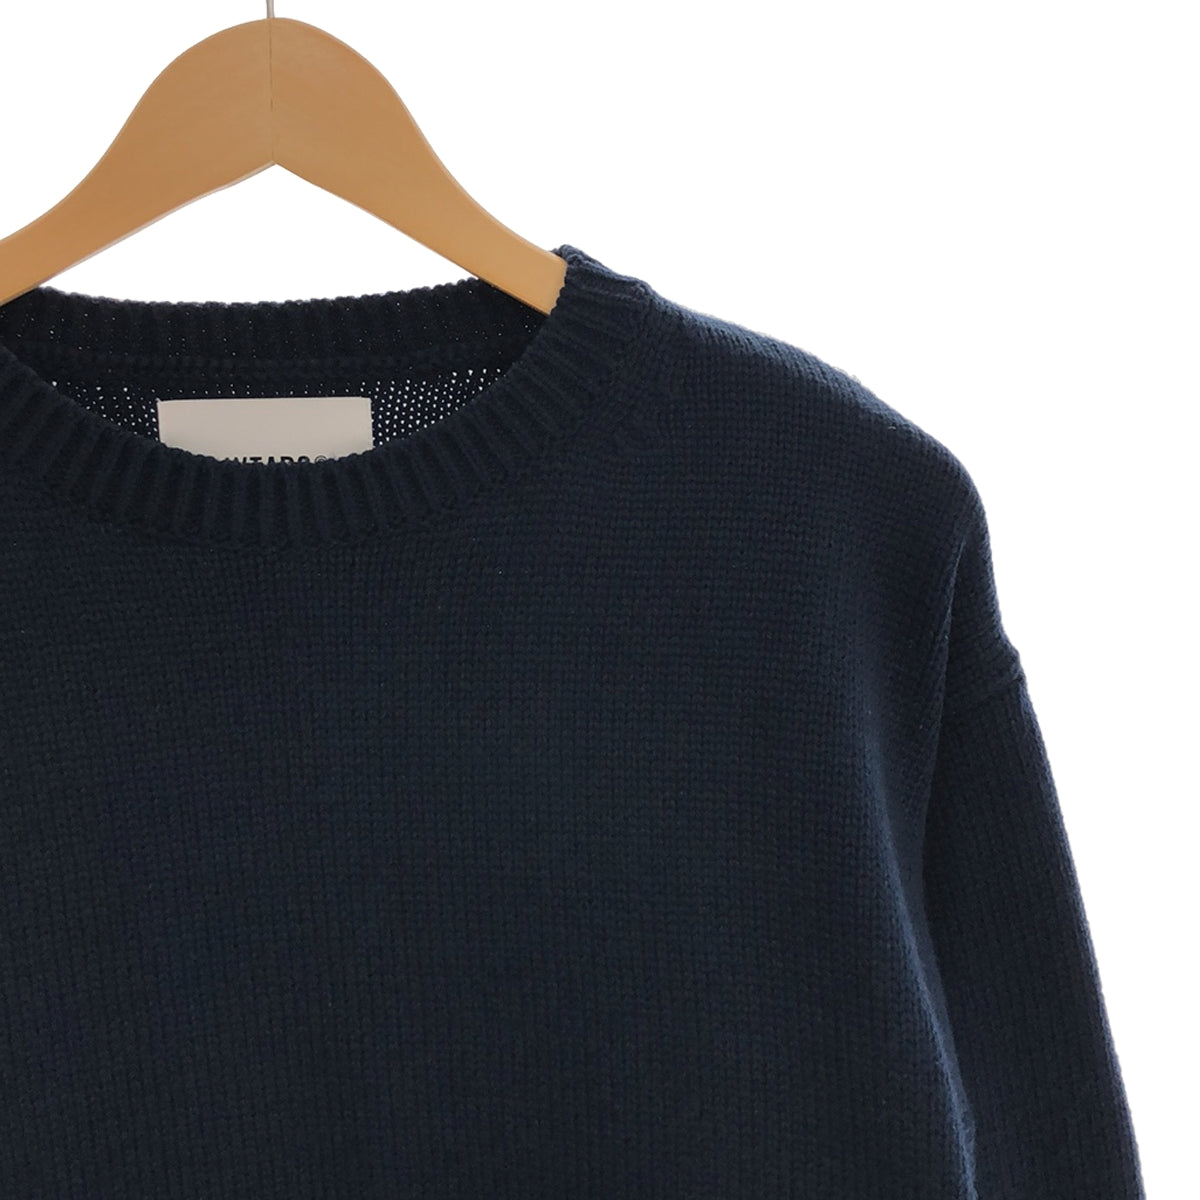 WTAPS / ダブルタップス | 2023AW | CREW NECK 02 / SWEATER / POLY.SIGN /  EX47collection / クルーネック ニット | 1 | メンズ